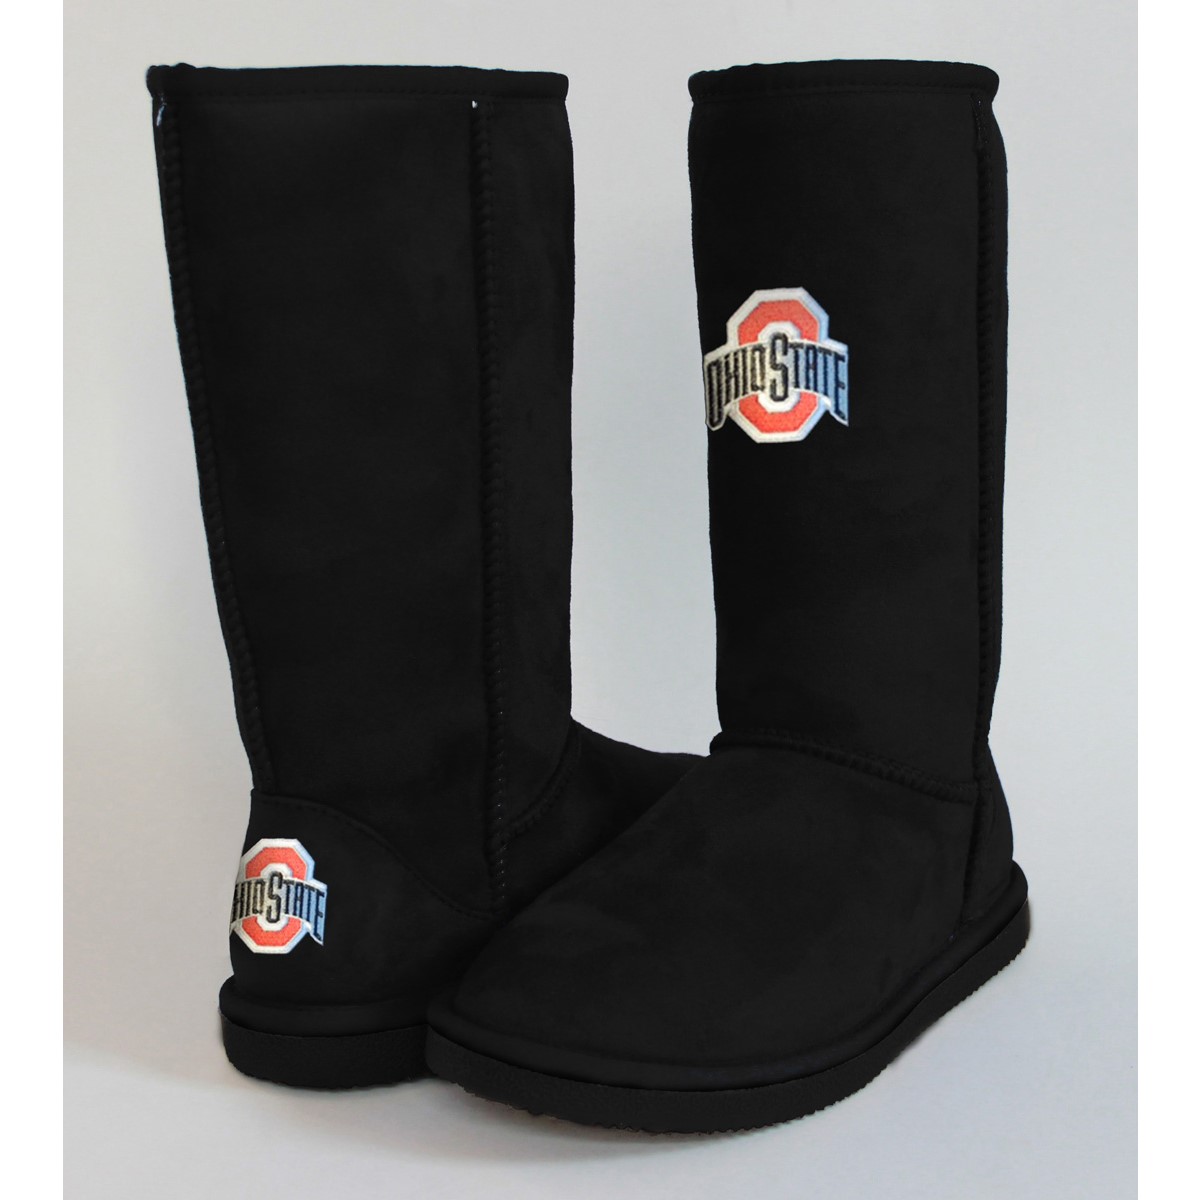 Ohio State boots for her College Traditions Columbus (614)291-4678